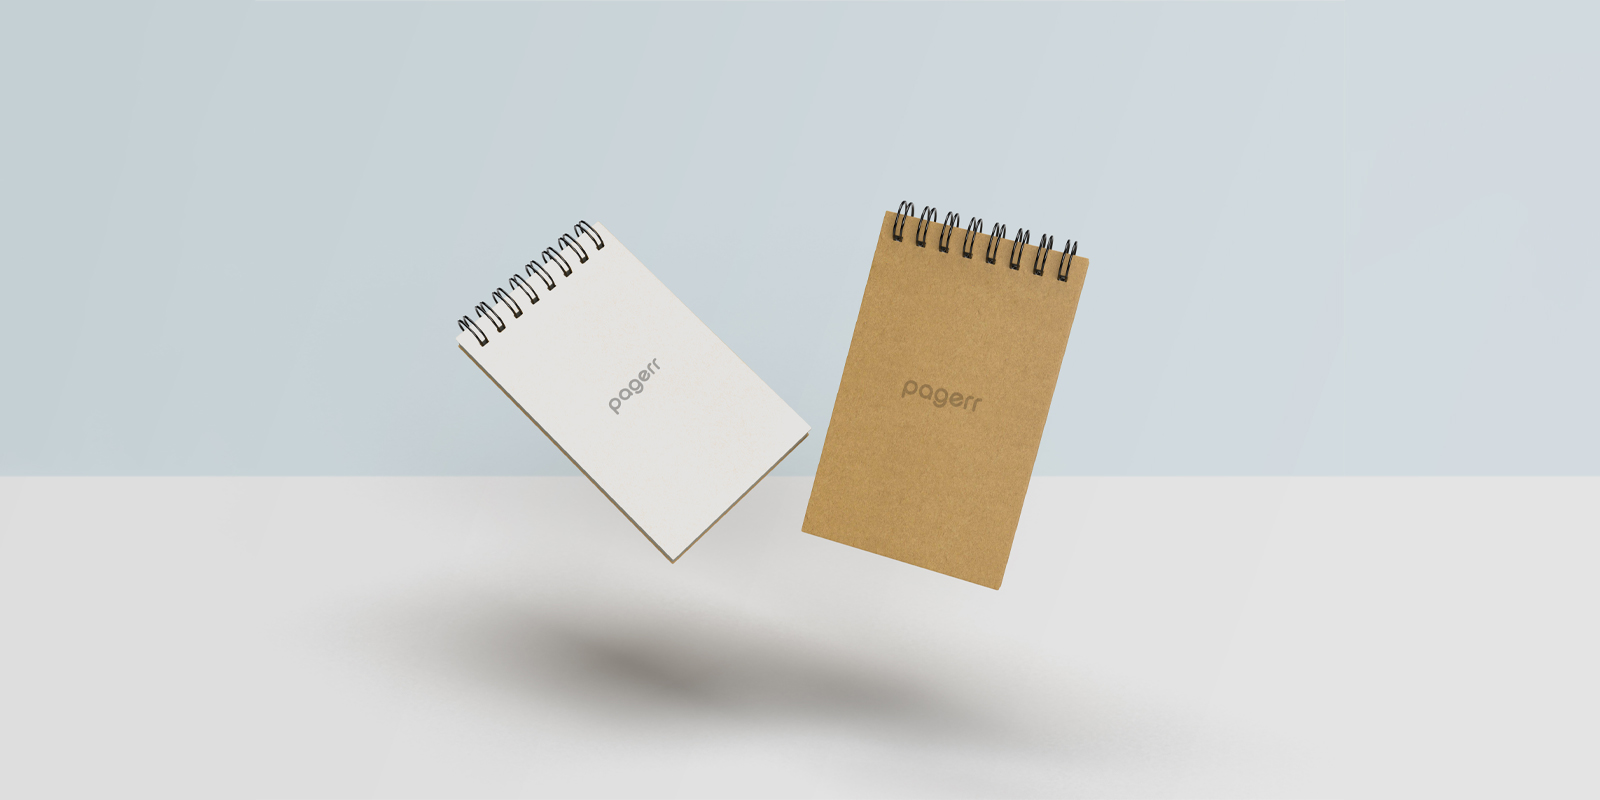 Notepads in Paris - Print with Pagerr